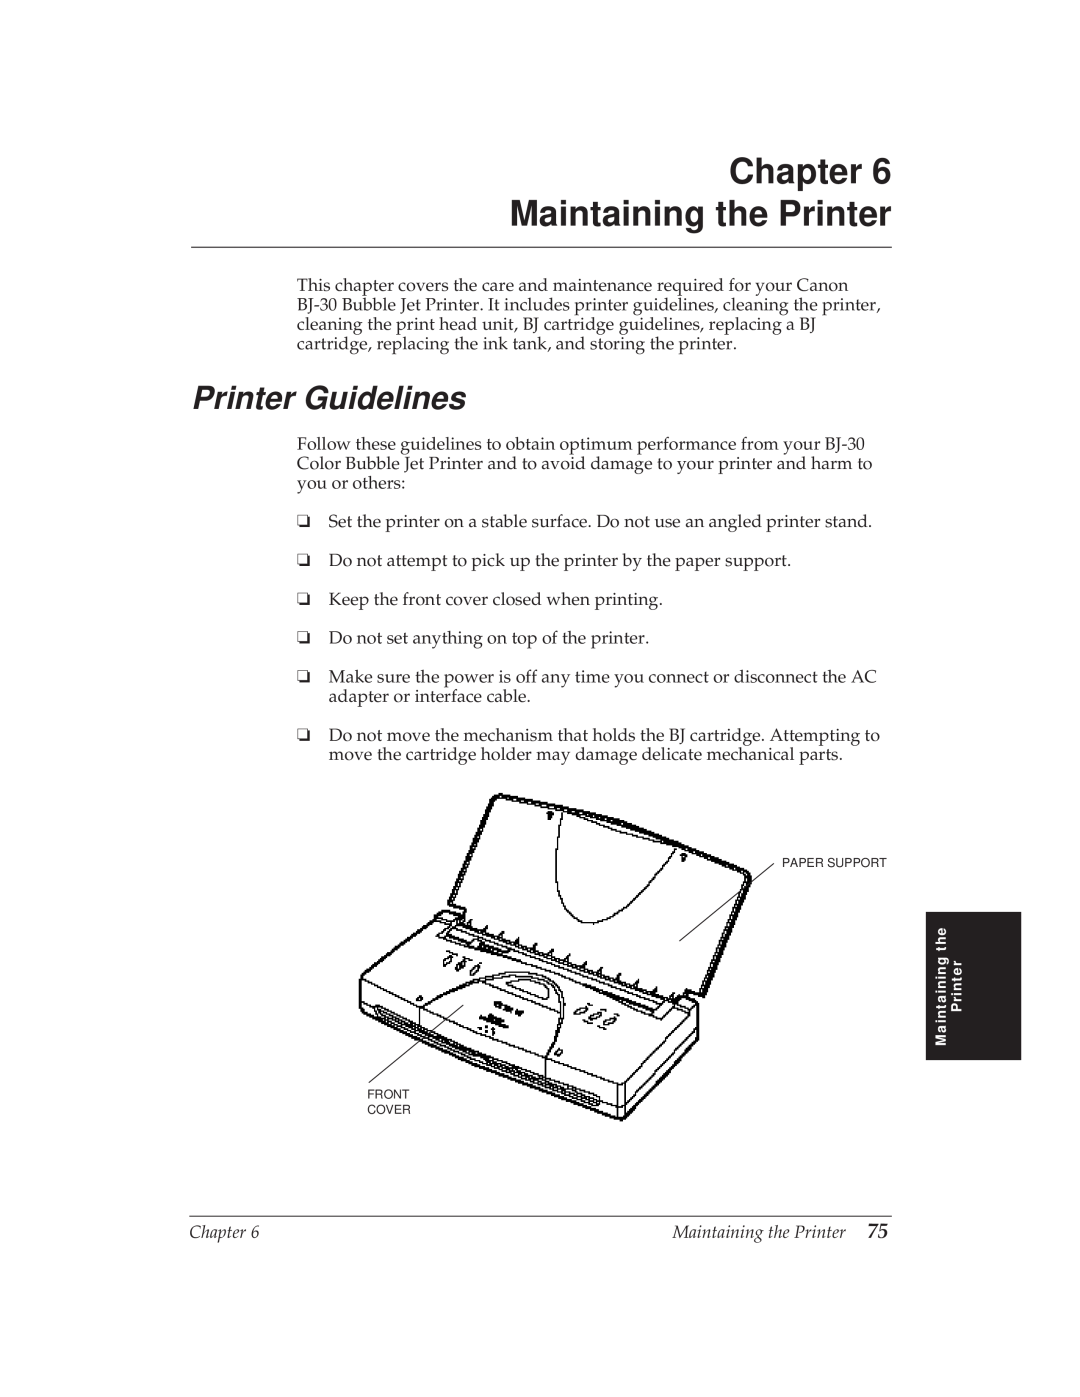 Canon BJ-30 manual Chapter Maintaining the Printer, Printer Guidelines 